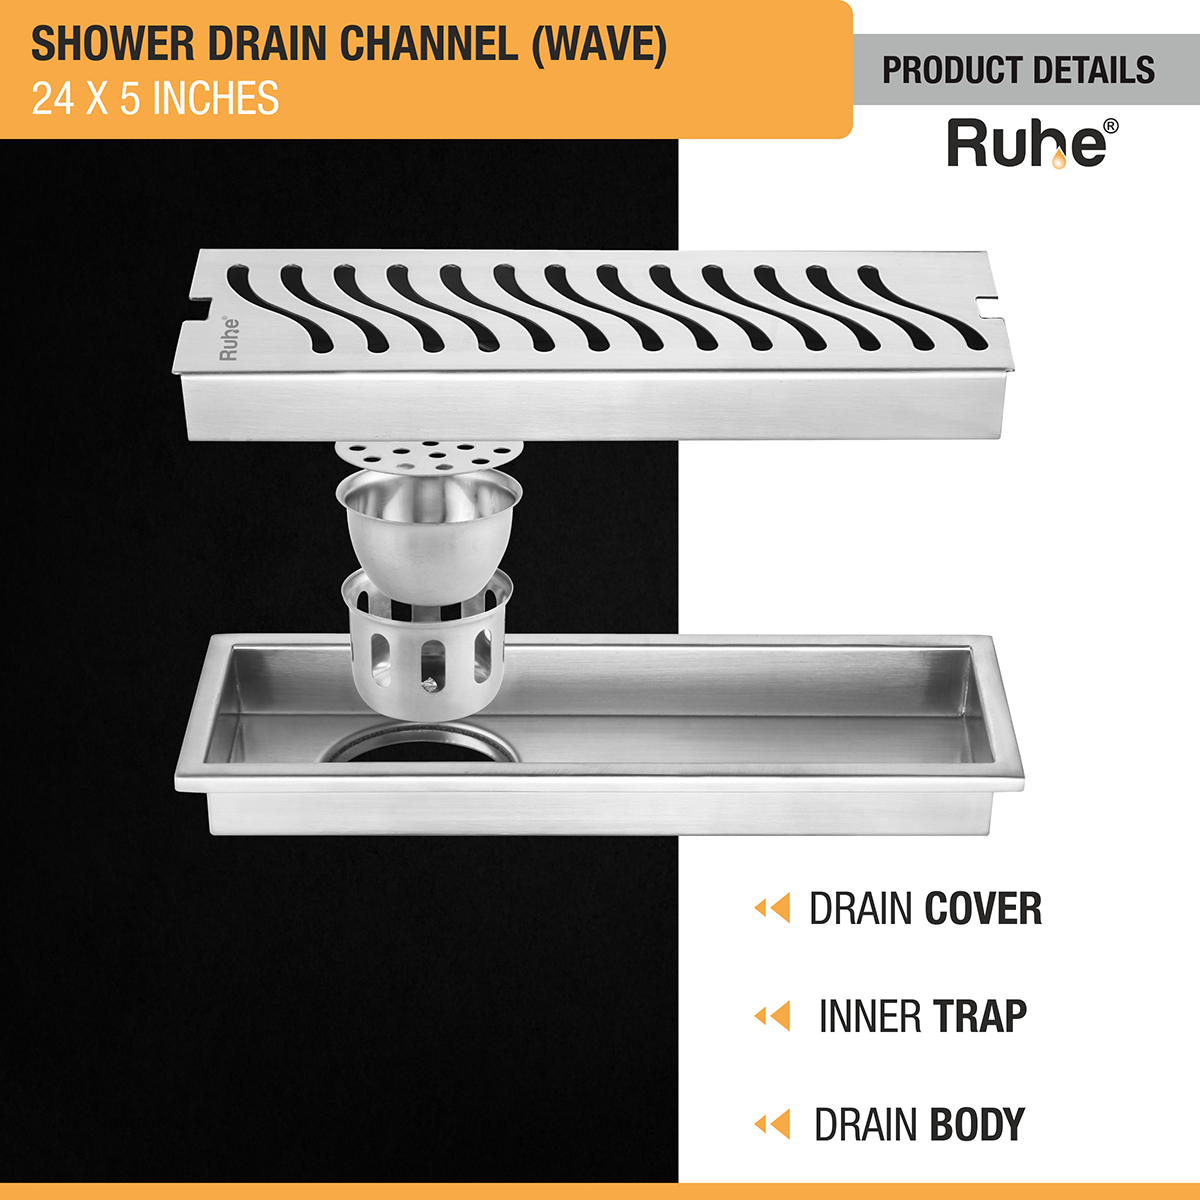 Wave Shower Drain Channel (24 X 5 Inches) with Cockroach Trap (304 Grade) product details